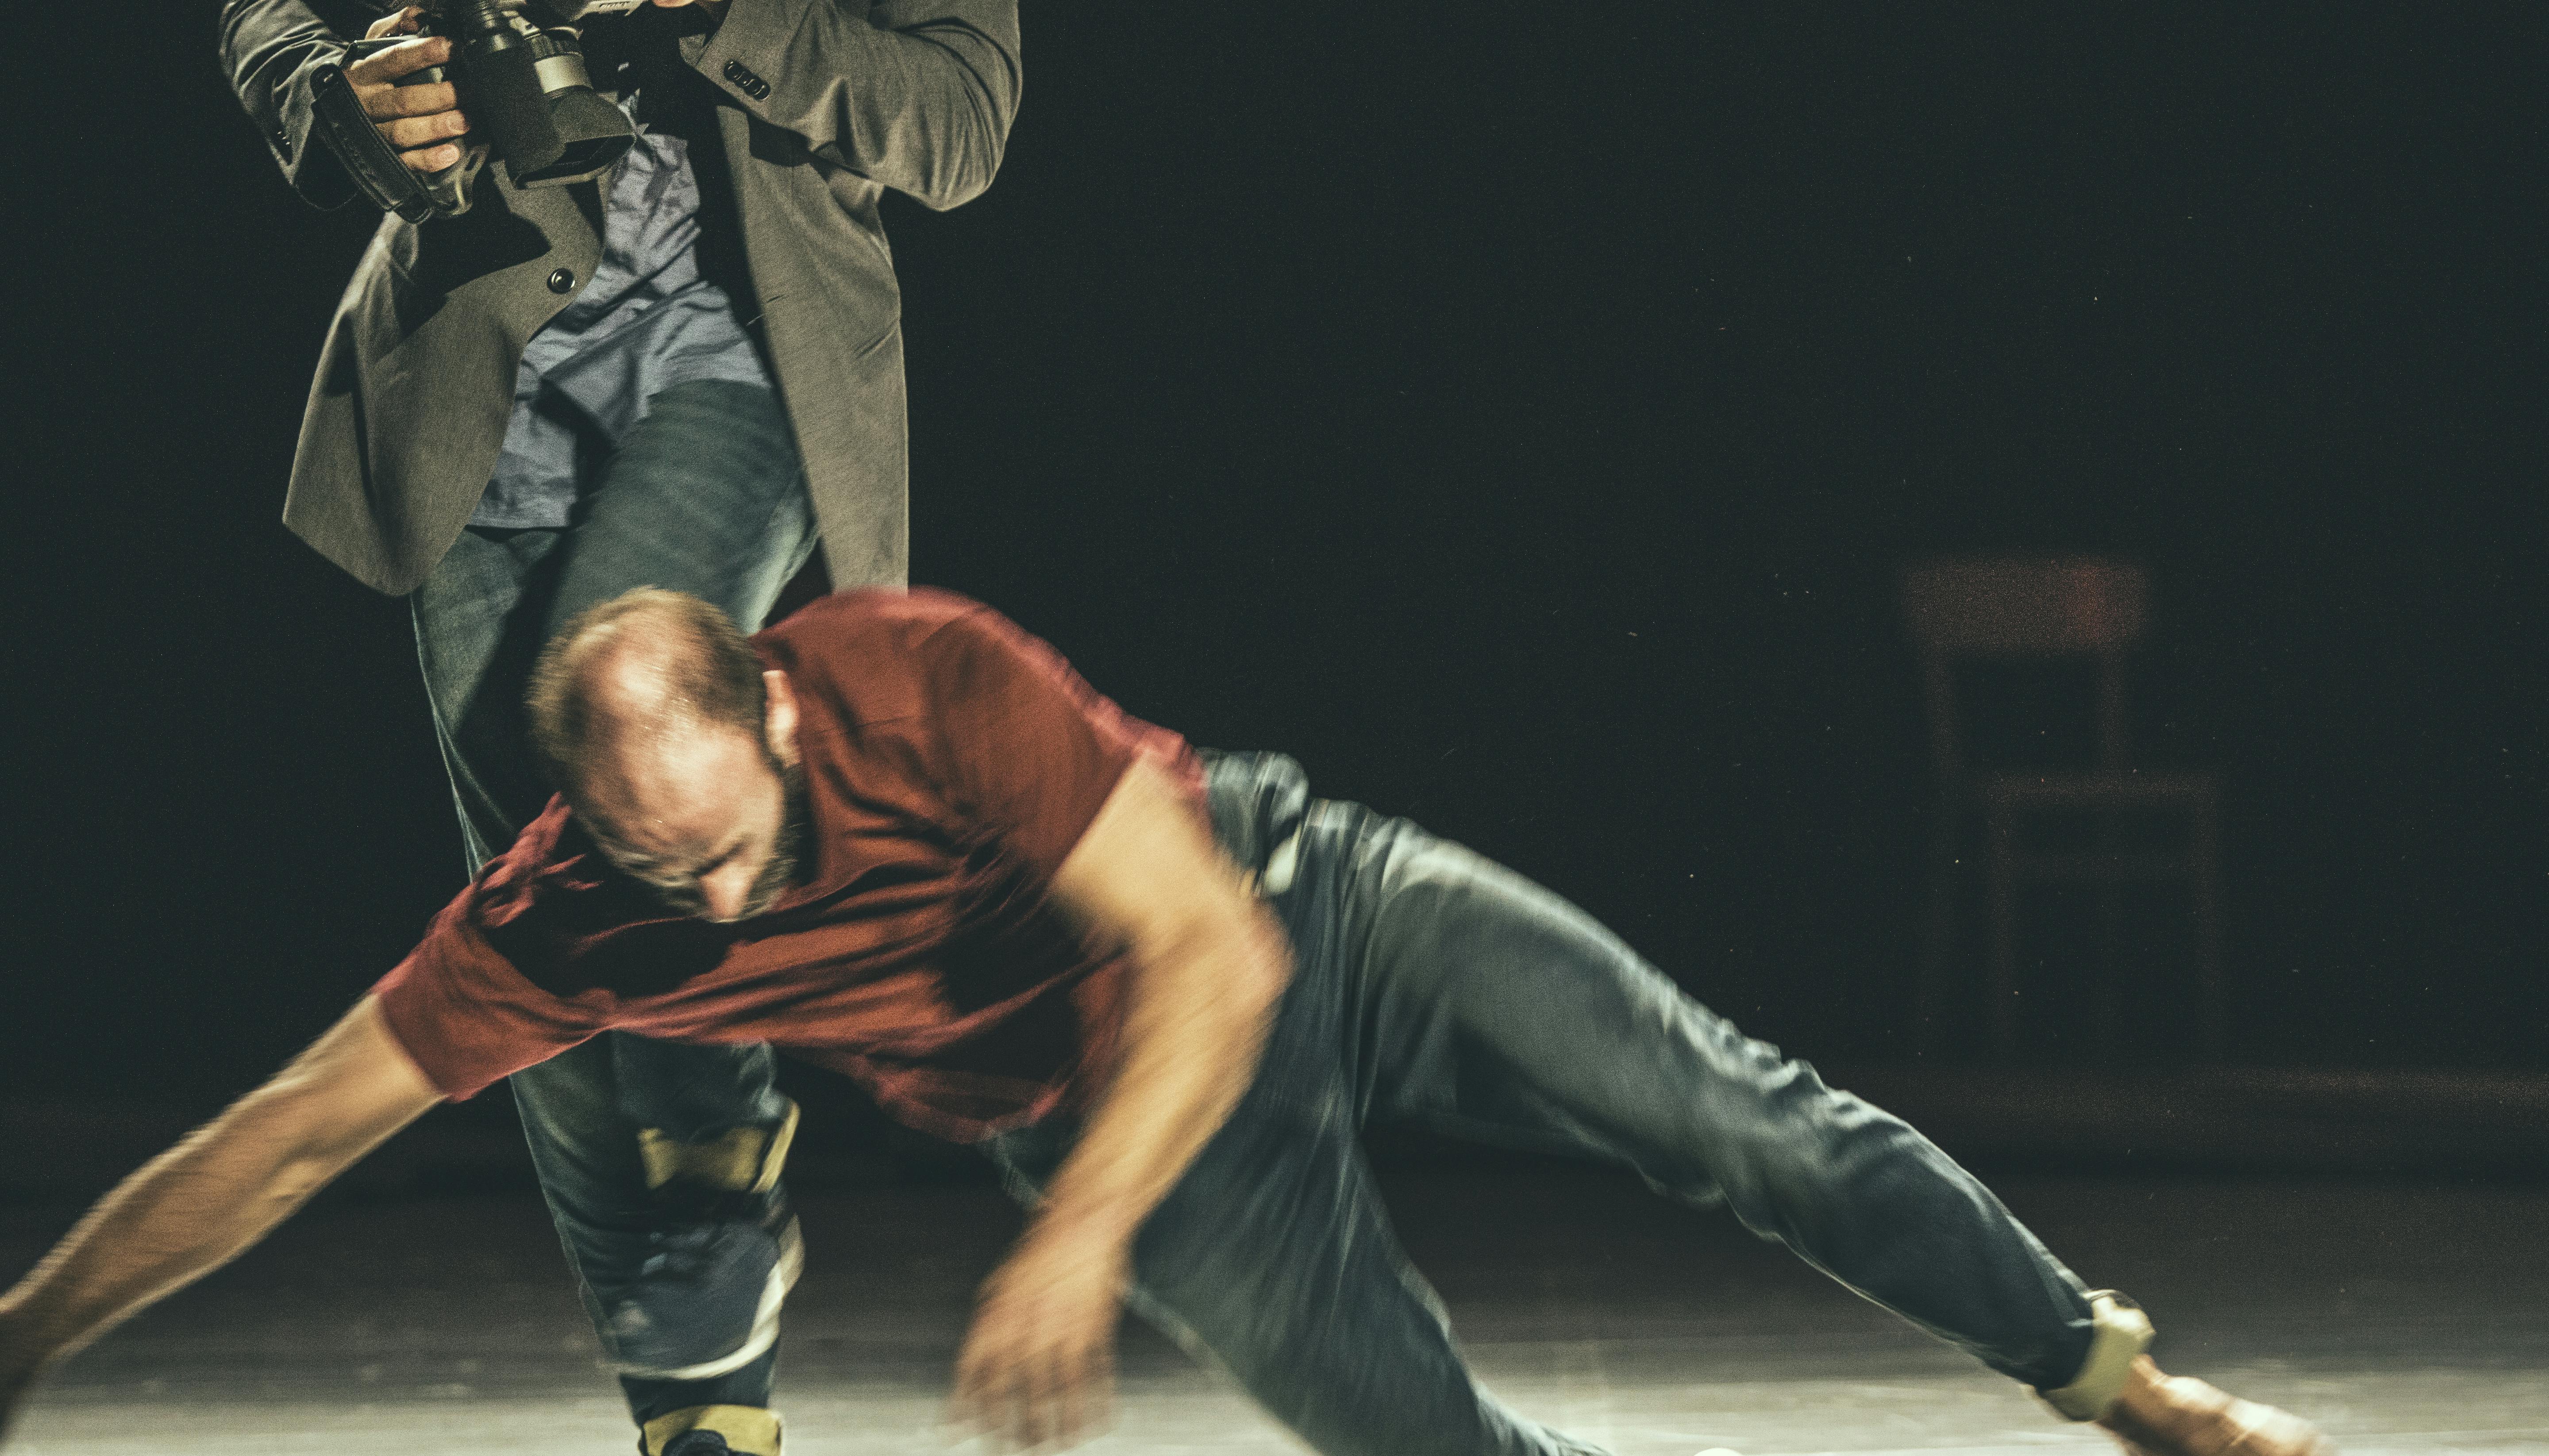 In front, a man is falling to the floor; behind, a second one is moving.